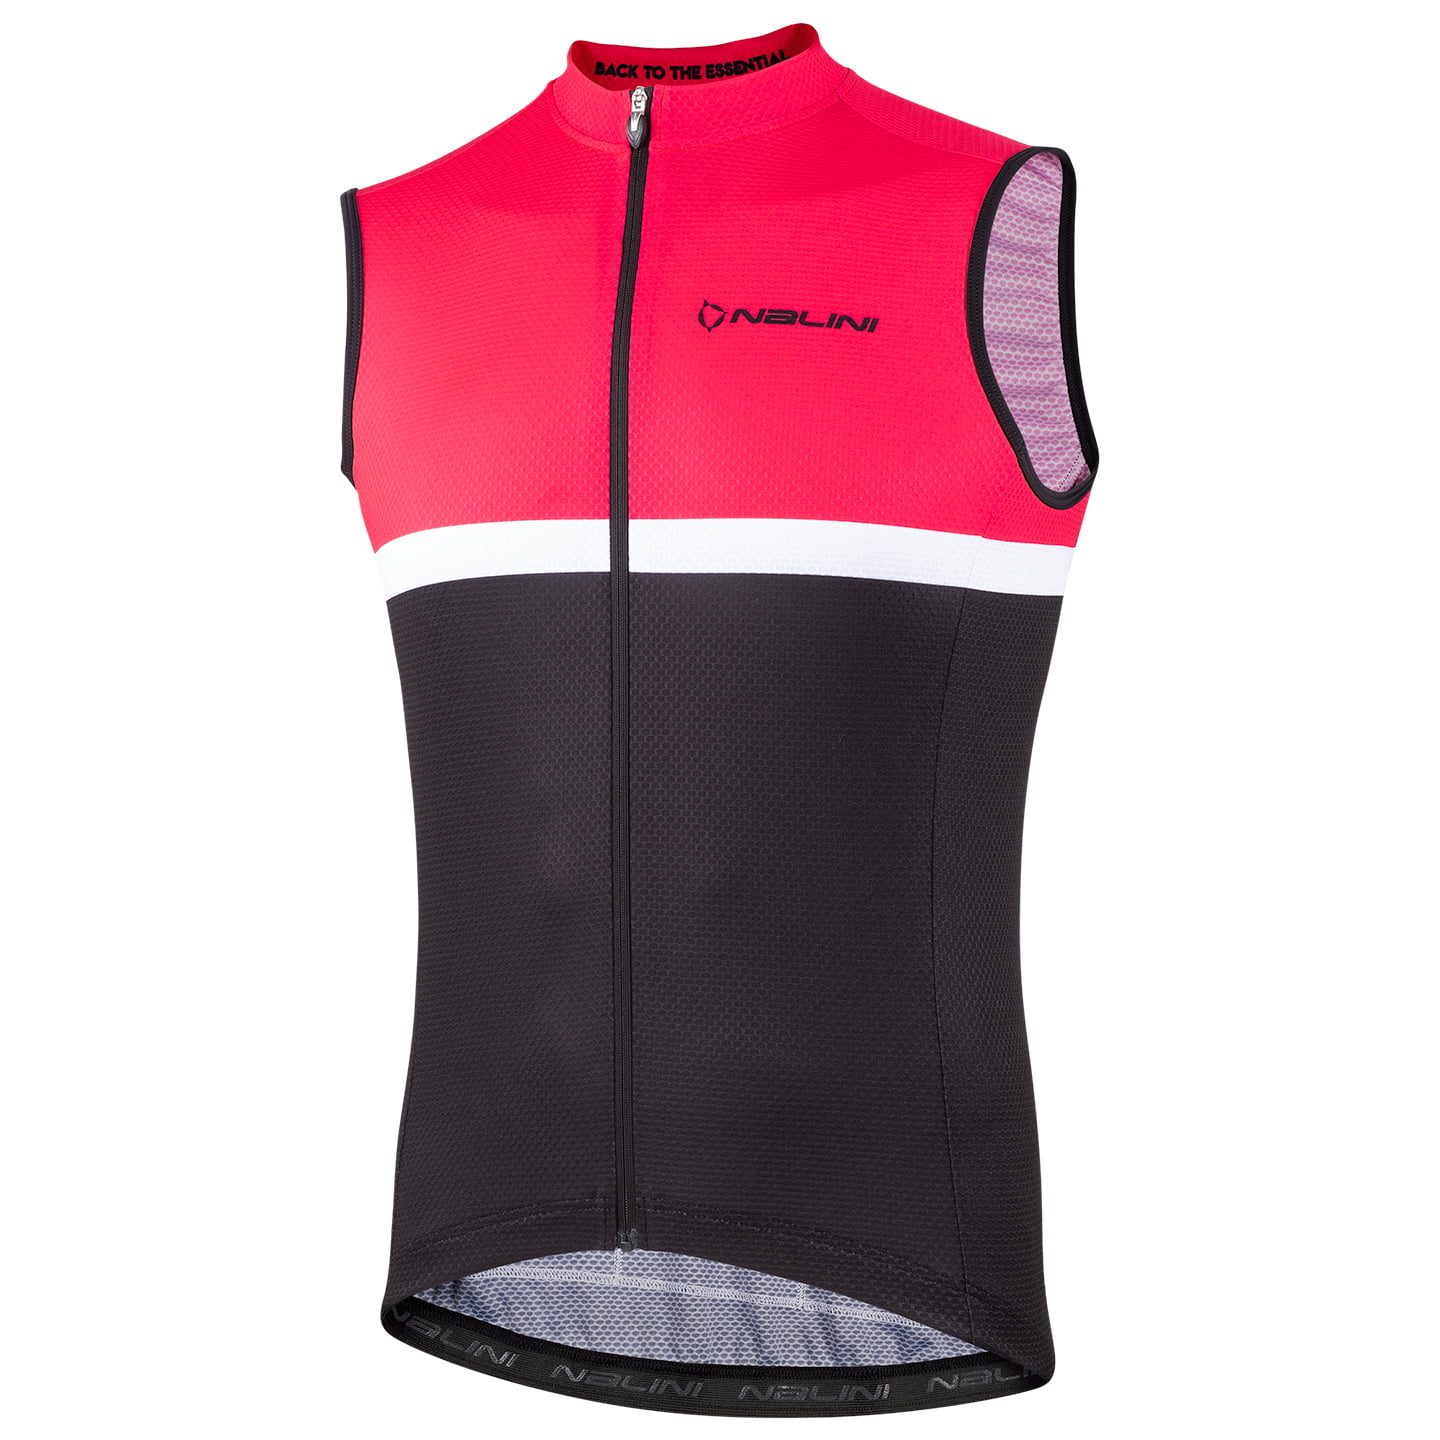 NALINI Solid Sleeveless Jersey, for men, size 2XL, Cycling jersey, Cycle clothing